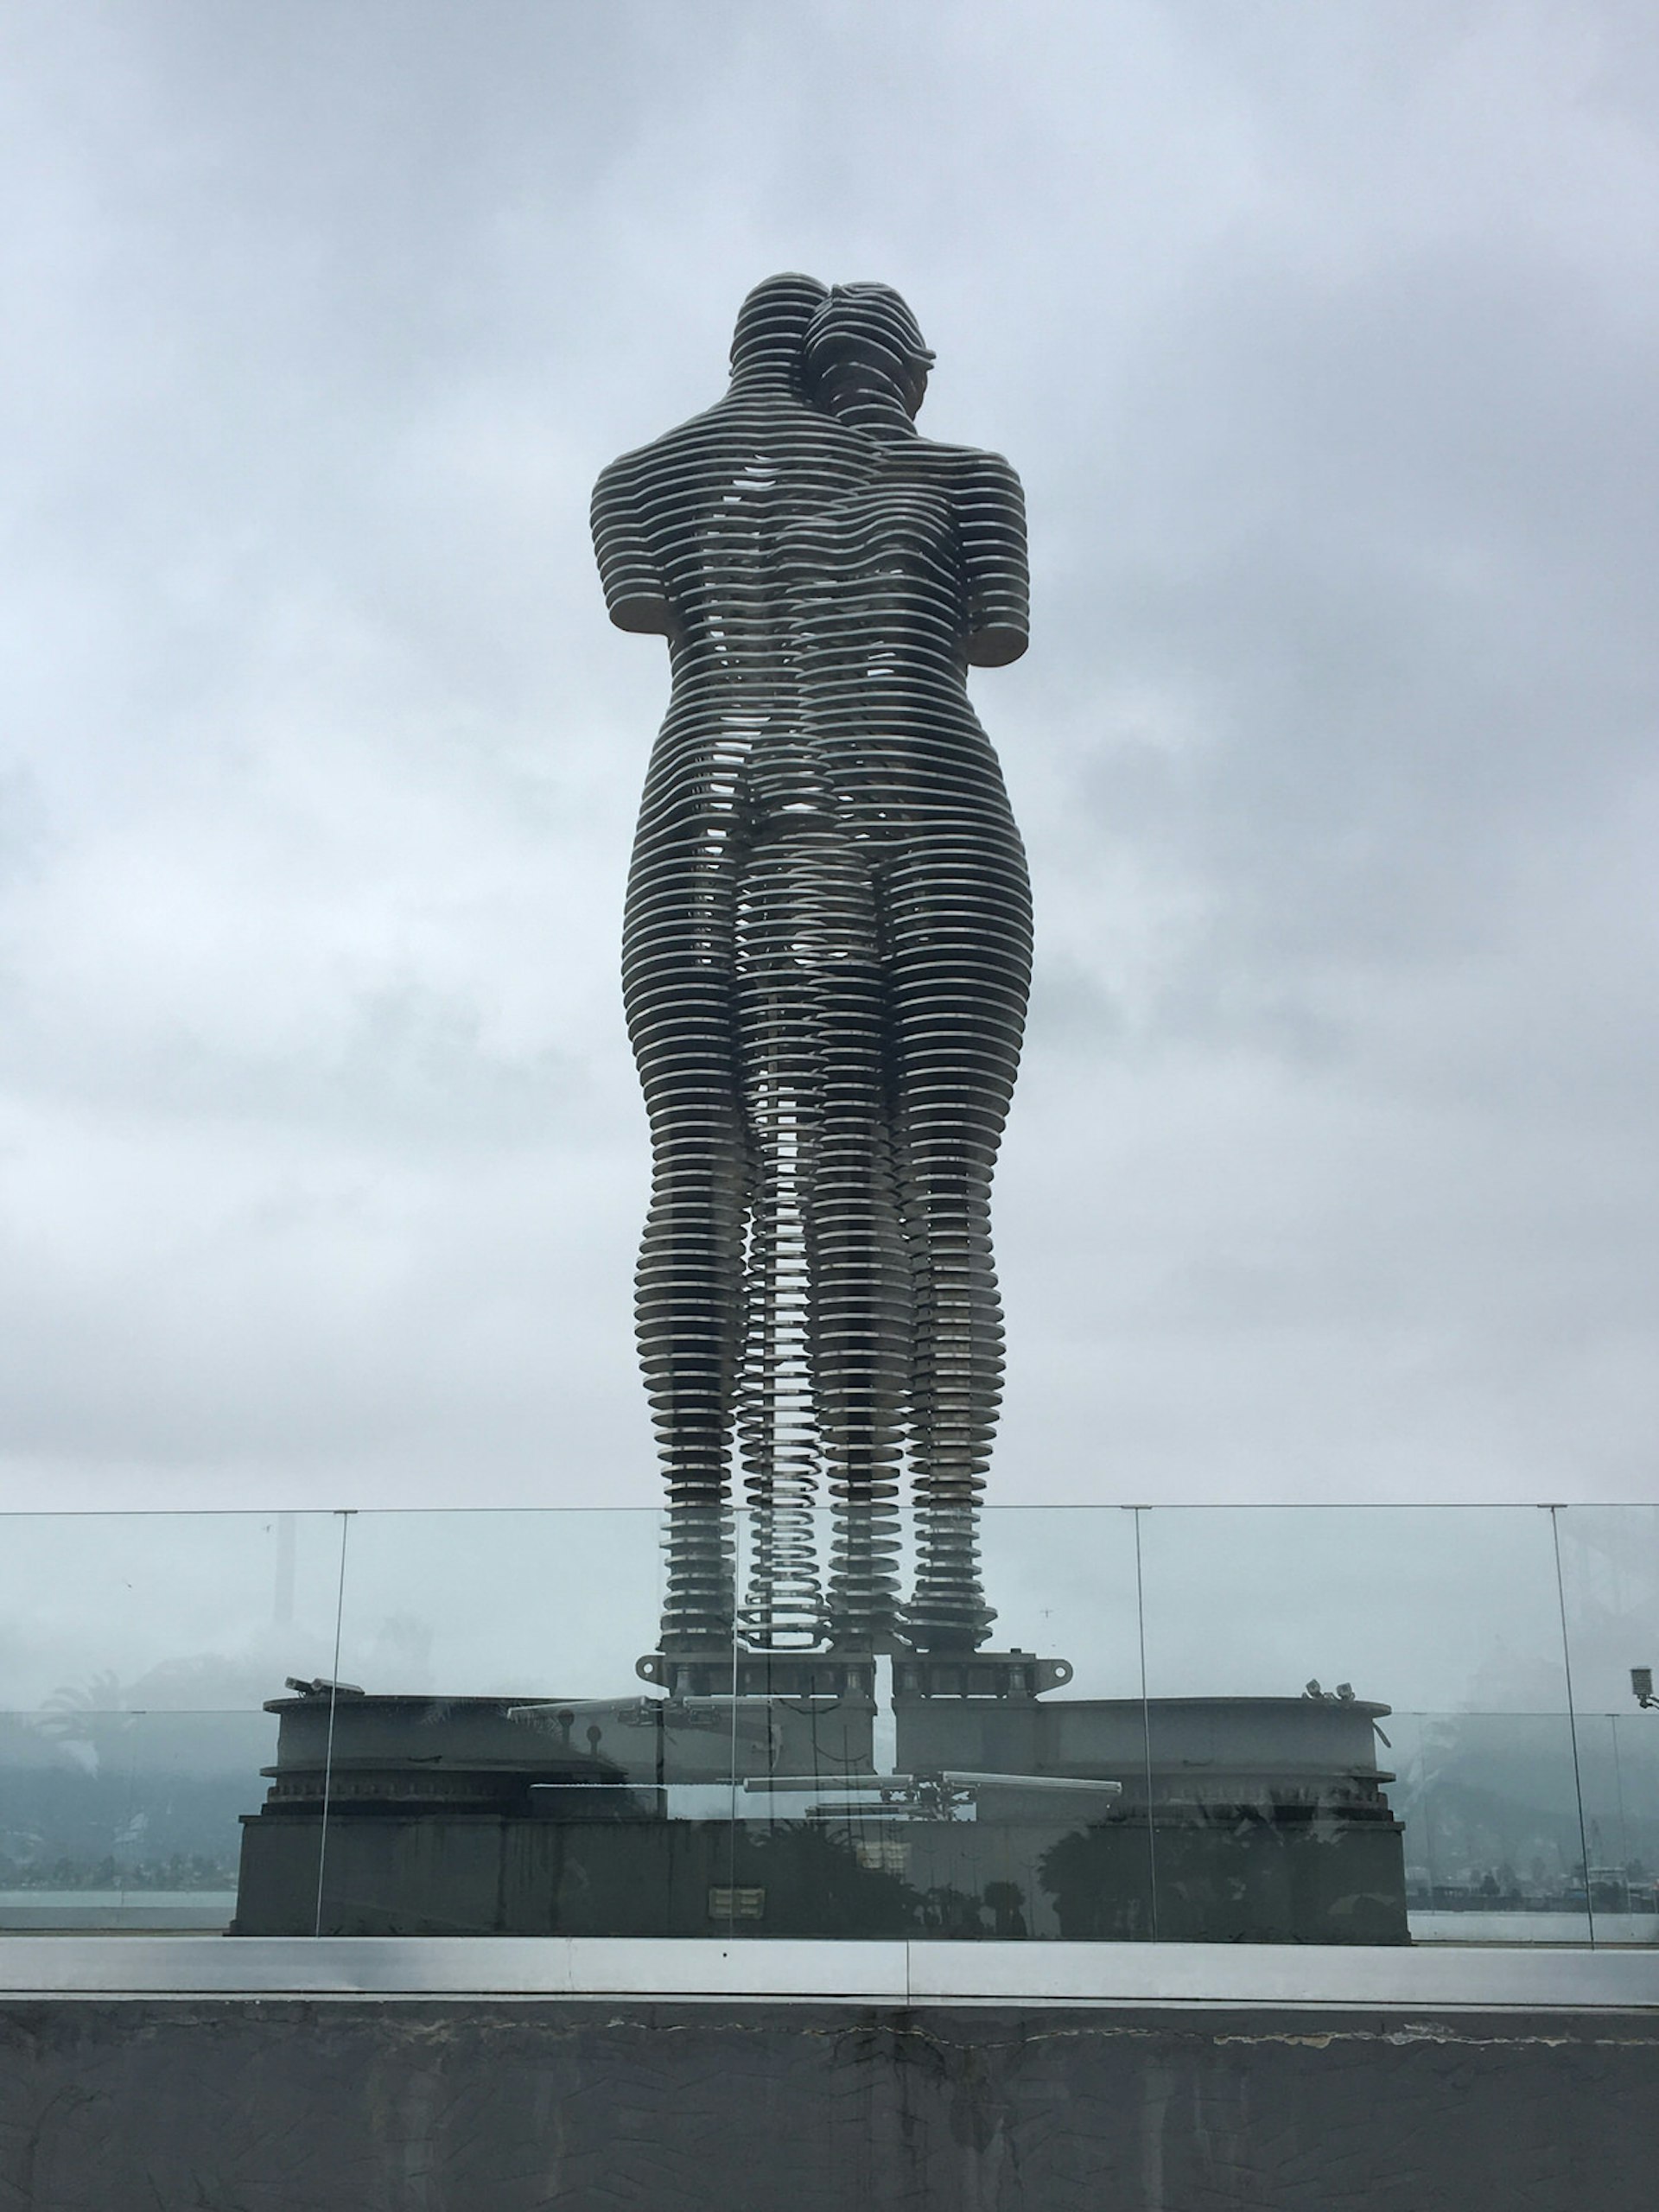 A large metallic sculpture depicting two standing figures merging into each other